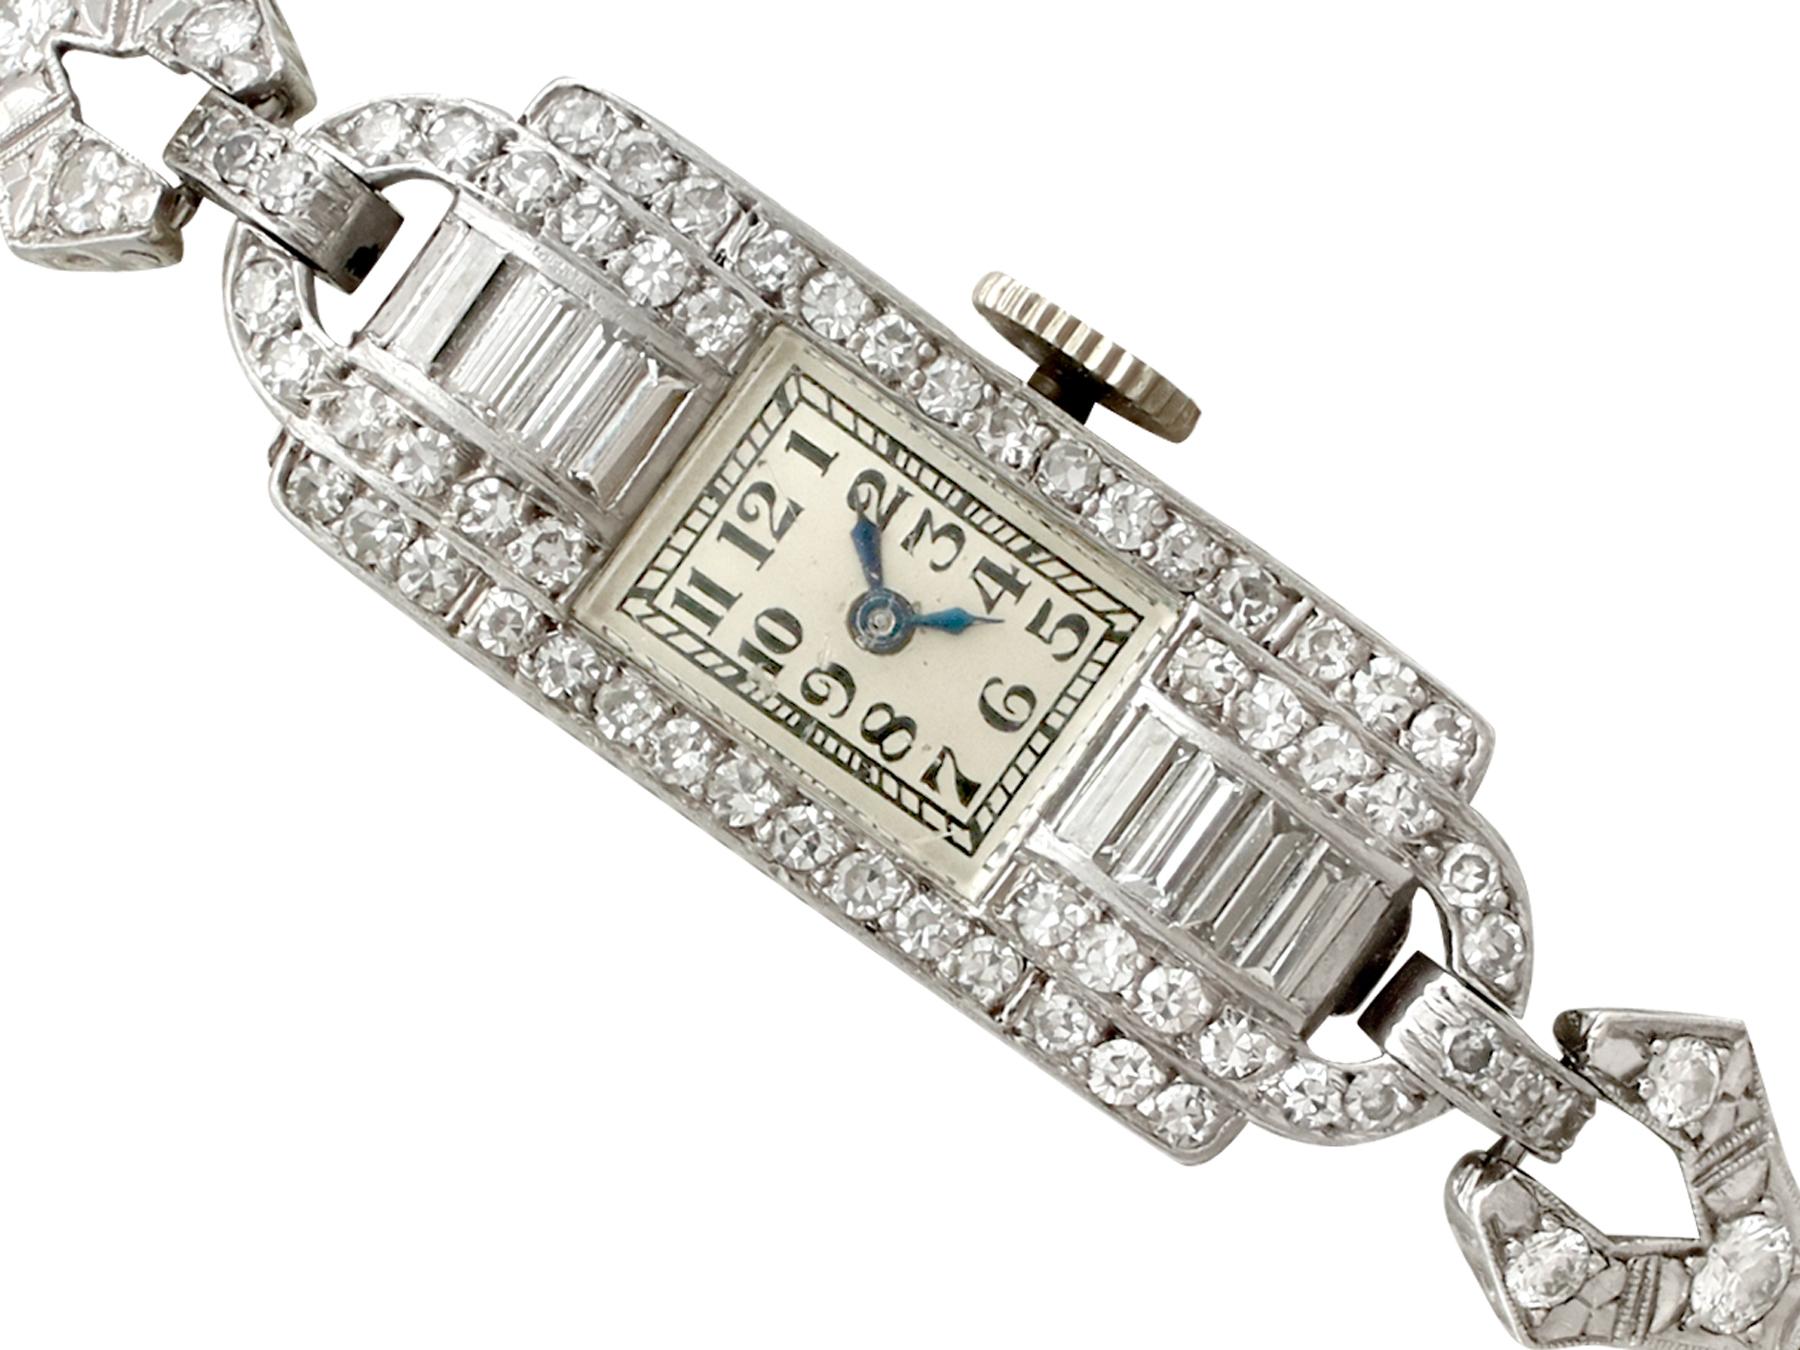 A stunning, fine and impressive antique 2.24 carat diamond and platinum Art Deco cocktail watch; part of our antique watch and diamond jewelry collections

This stunning antique diamond cocktail watch has been crafted in platinum.

This ladies